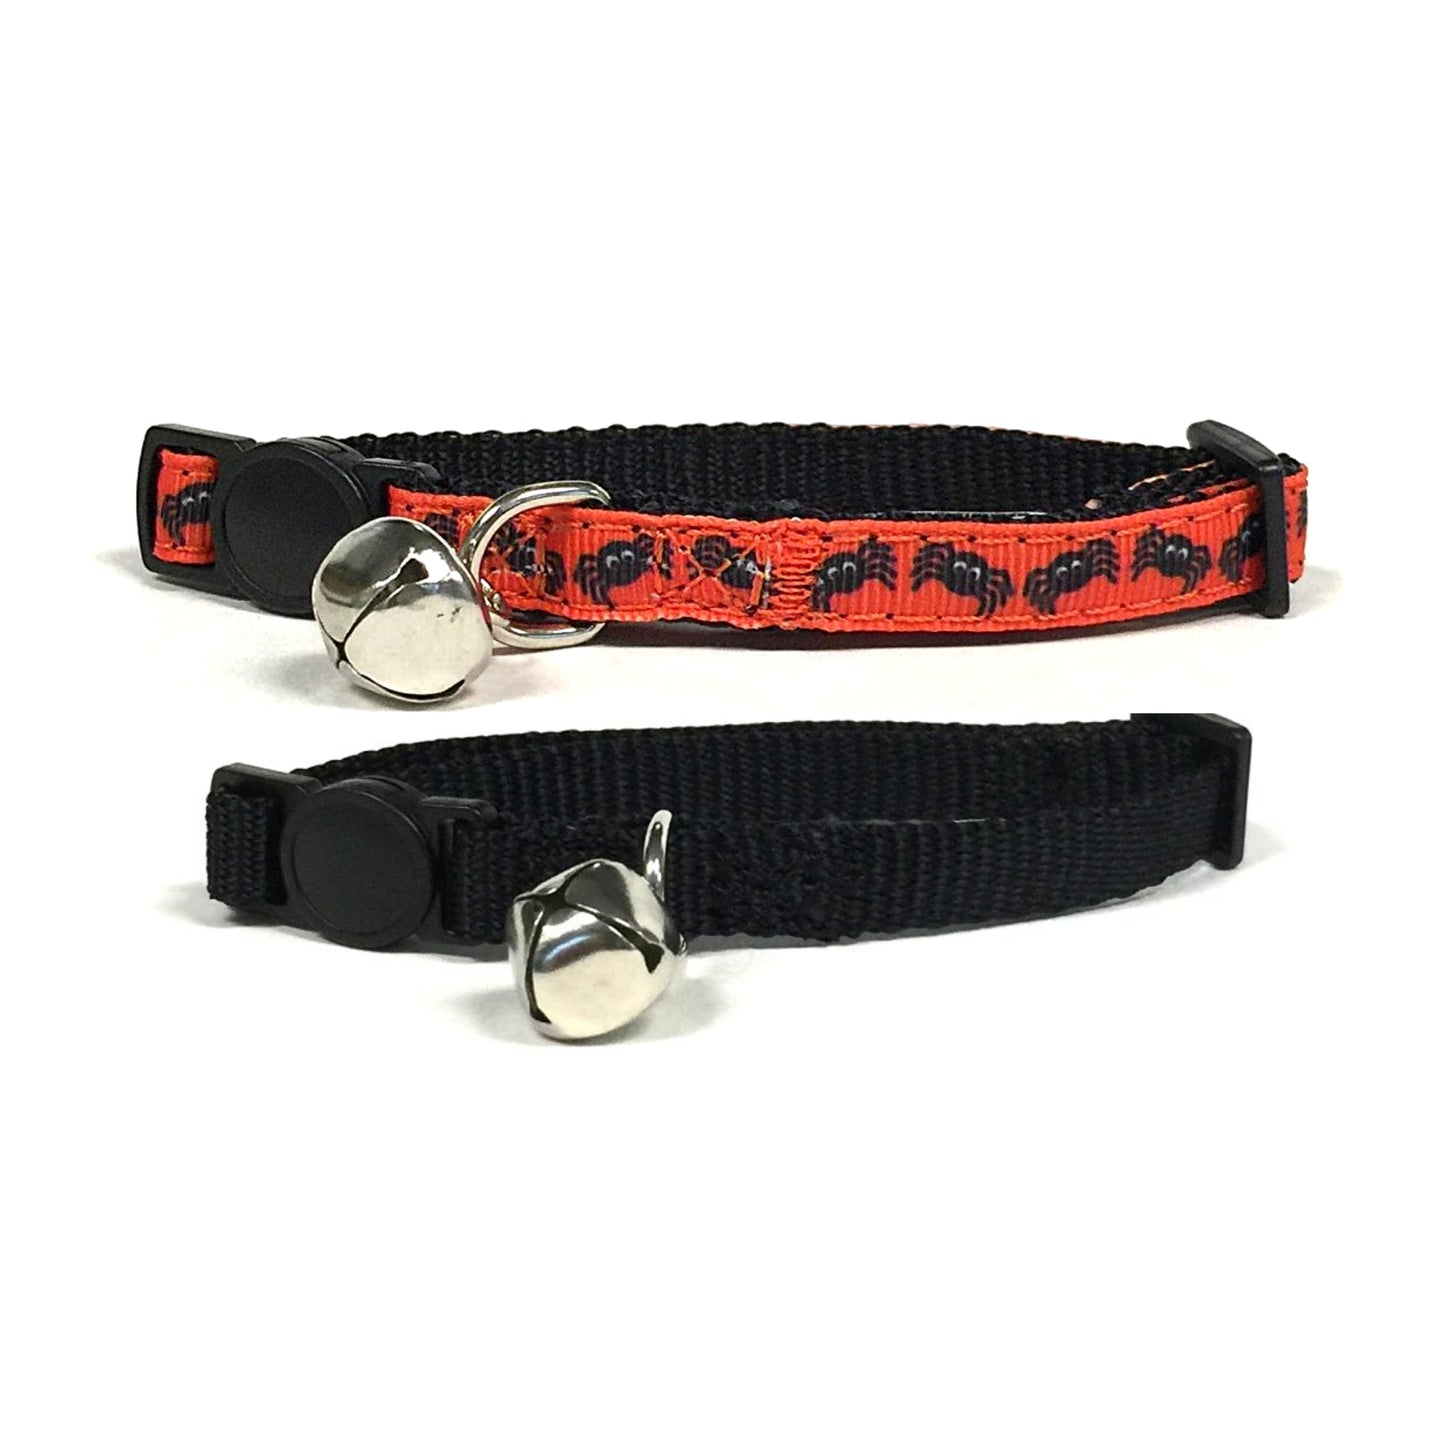 Midlee Halloween Spider Cat Collar Set with Safety Buckle